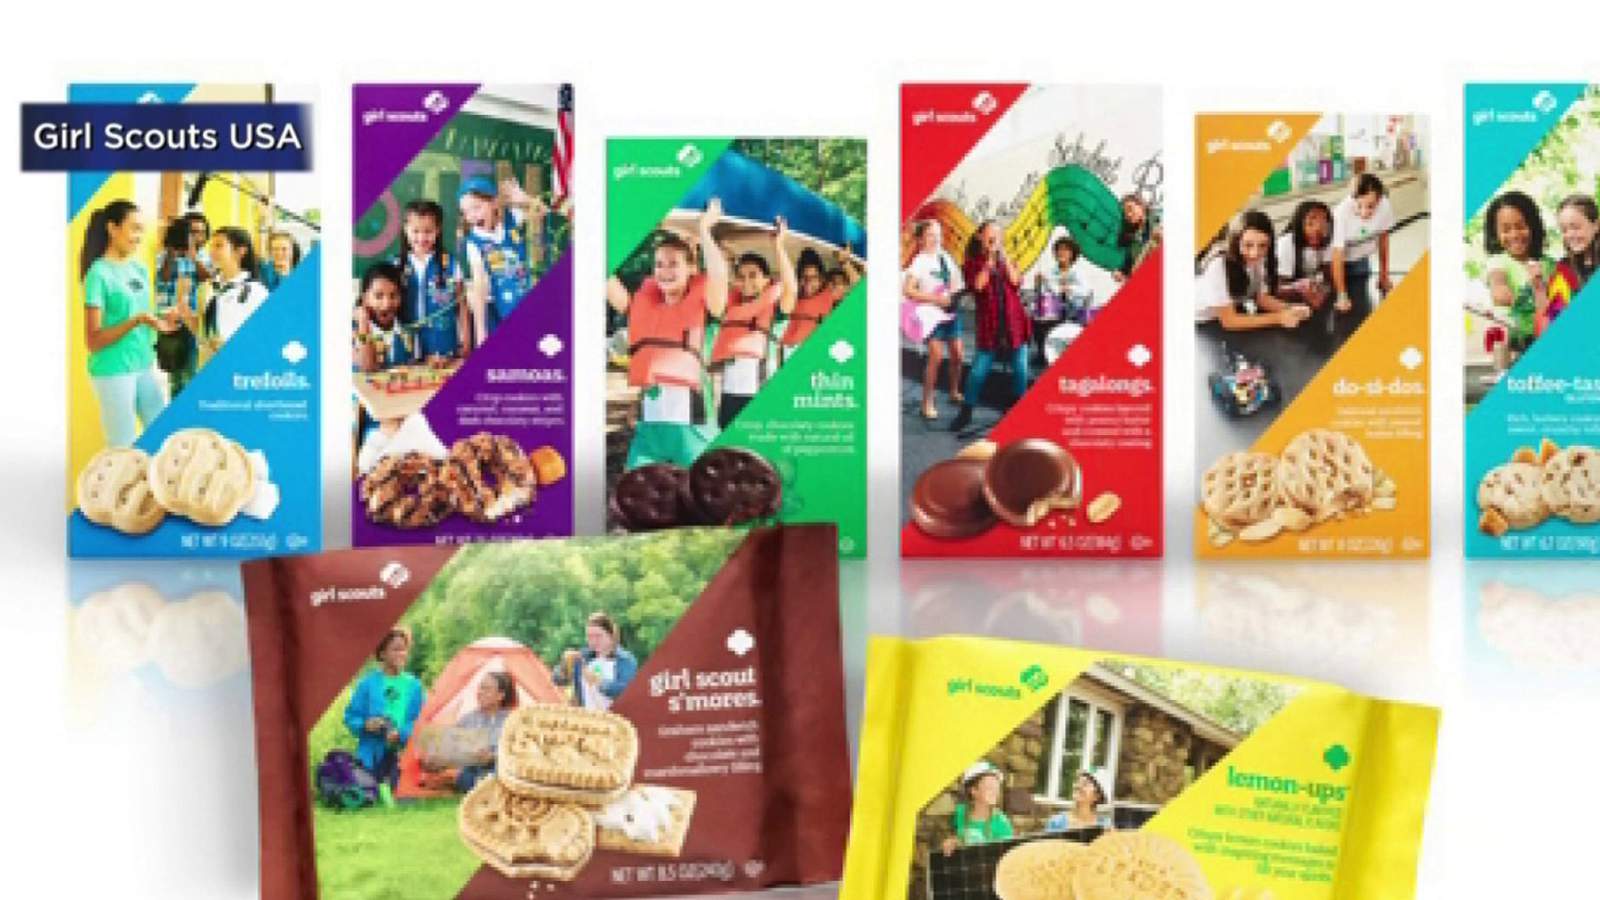 You can soon order Girl Scouts cookies right from Grubhub